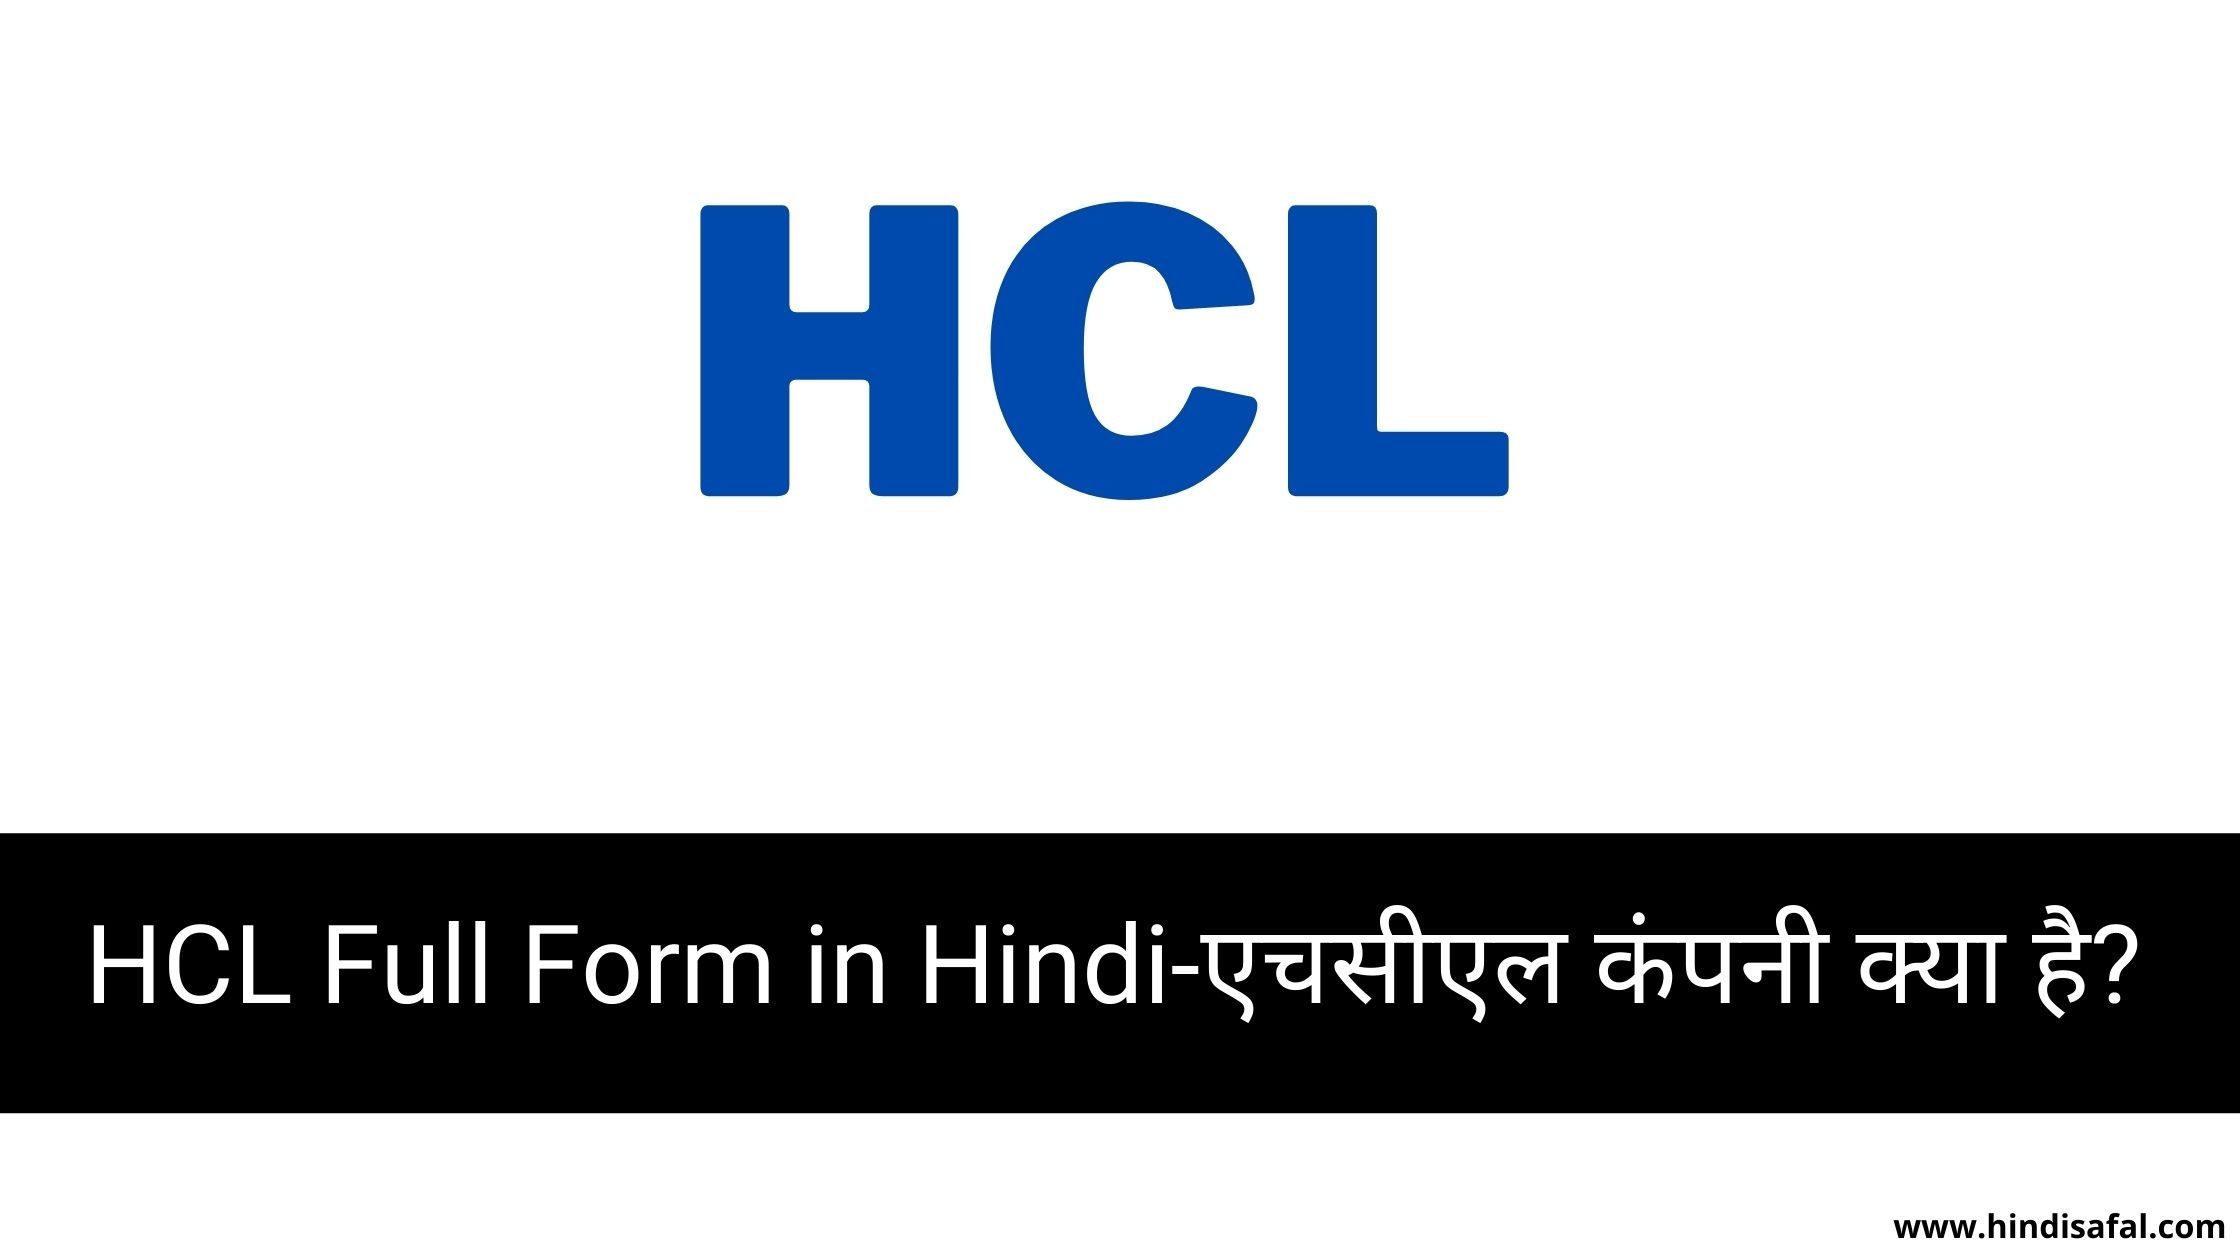 HCL Full Form in Hindi